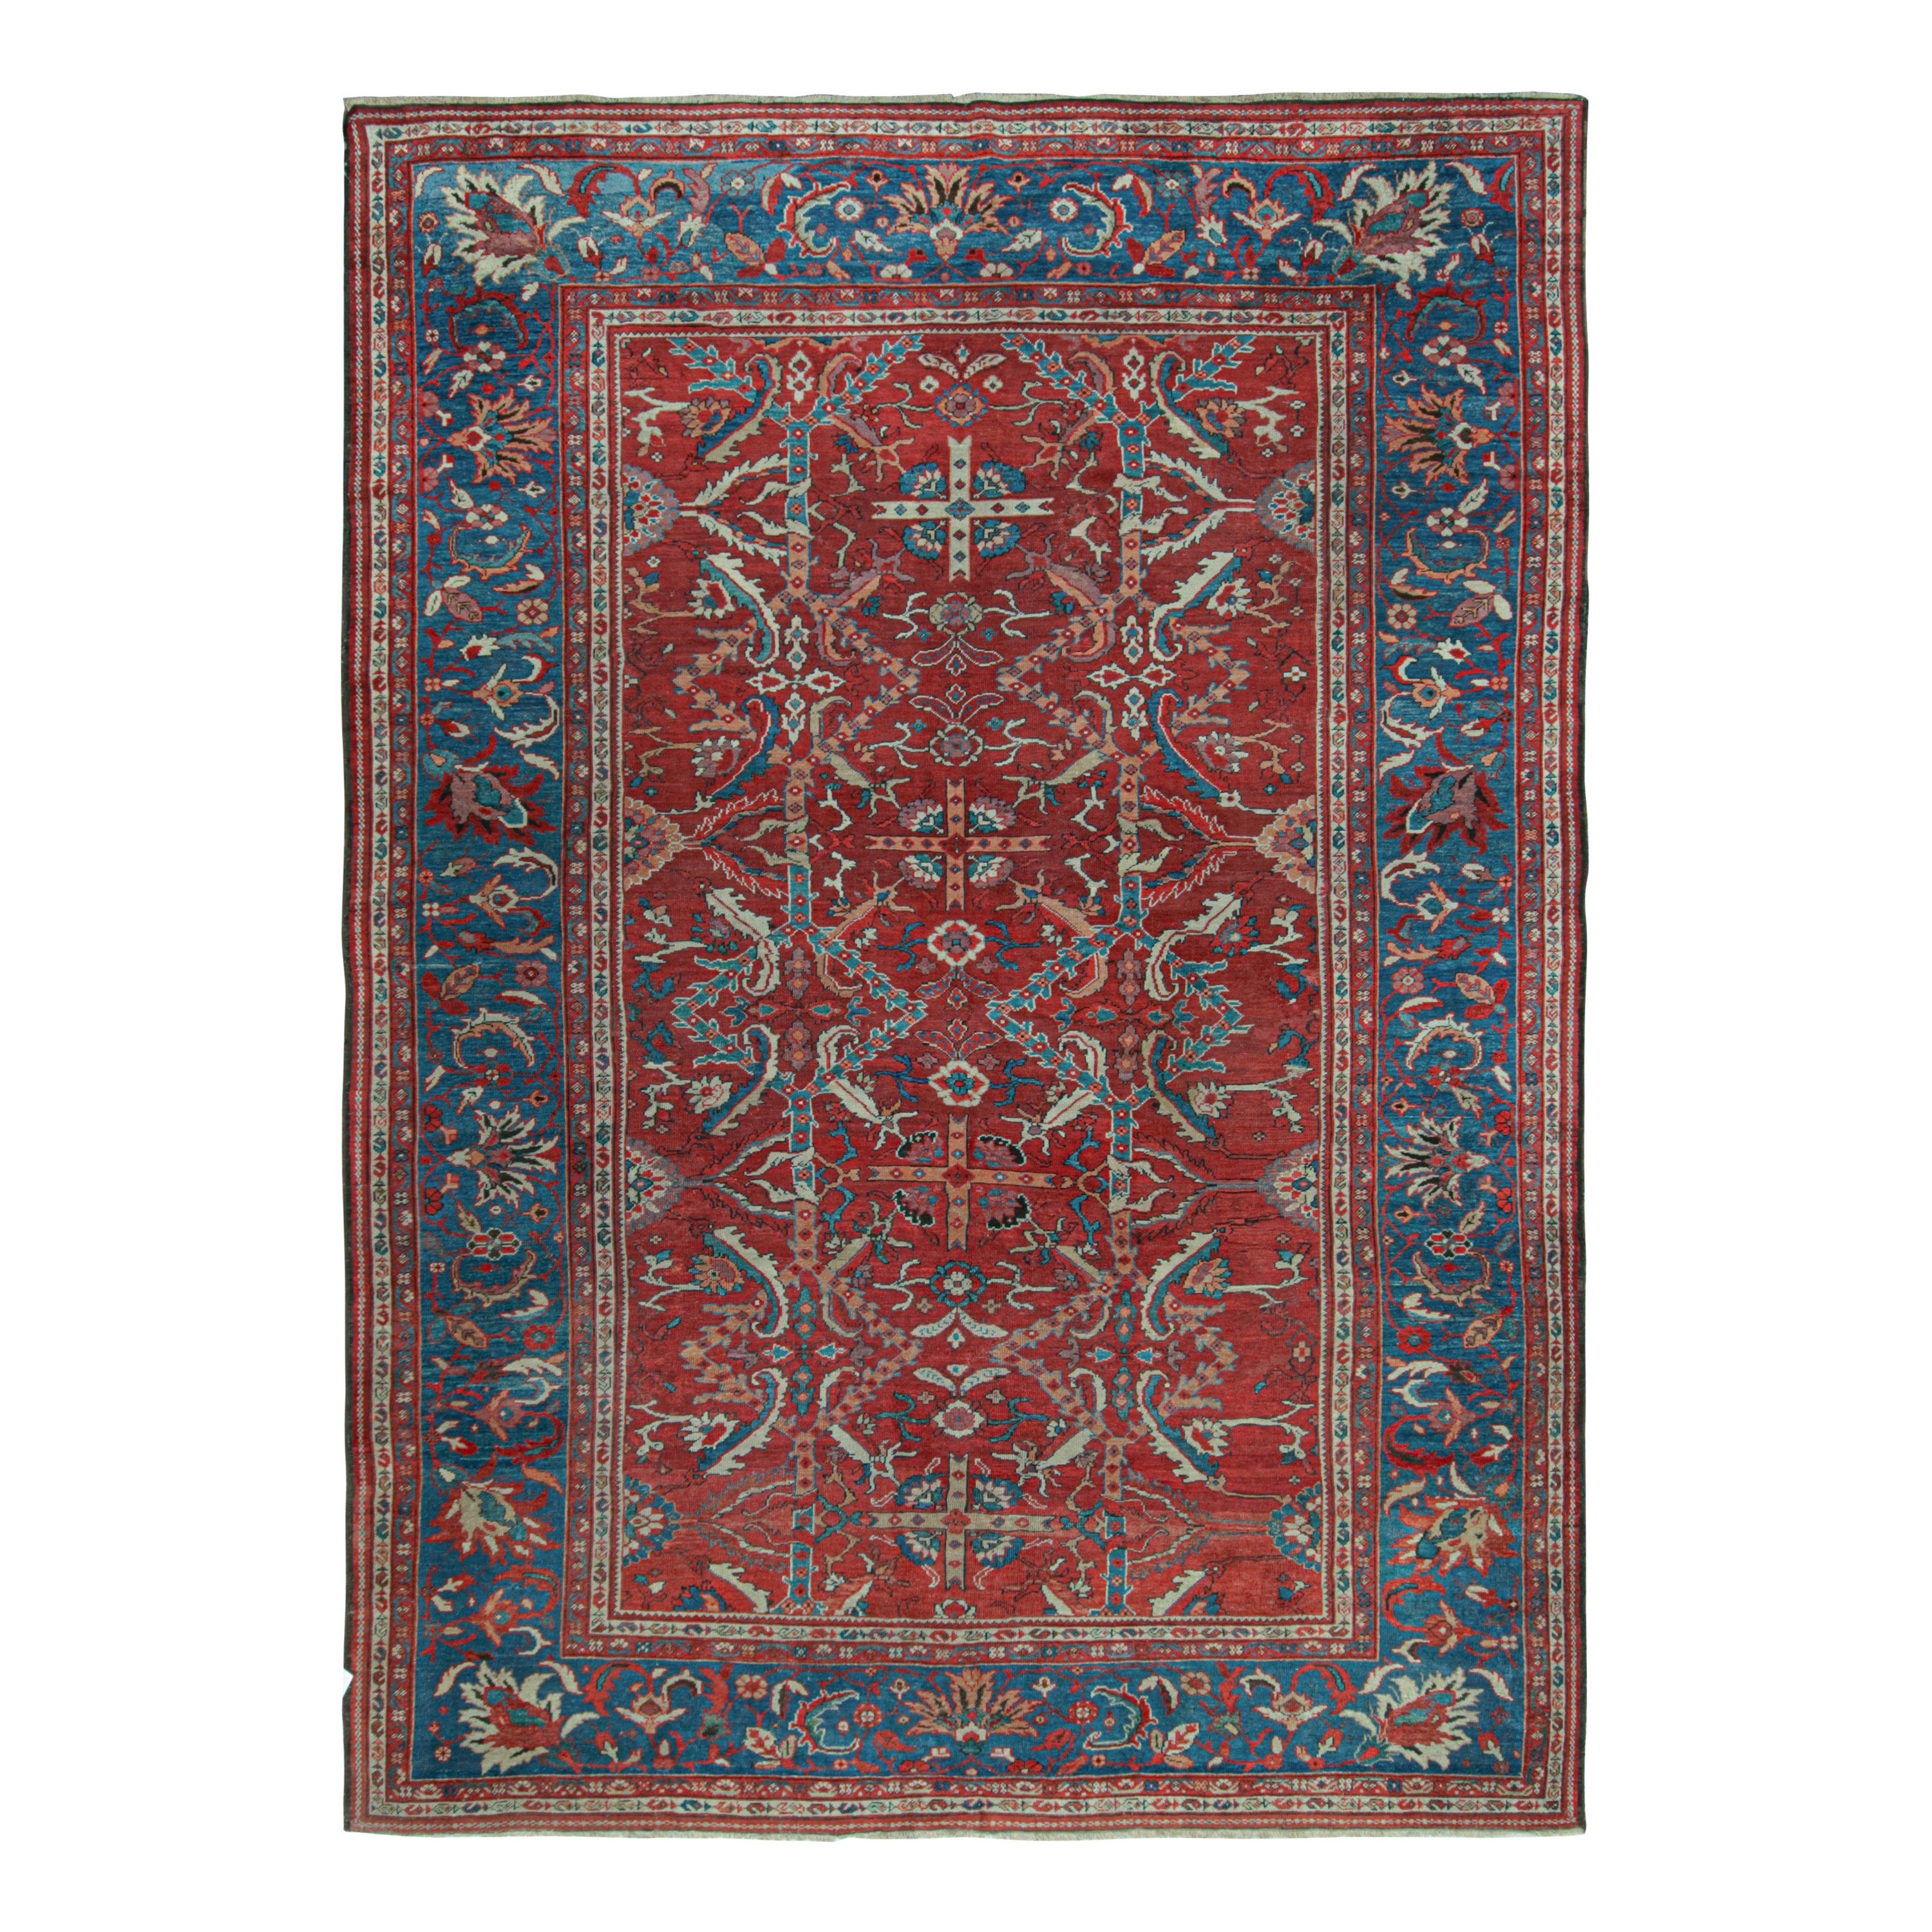 Antique Persian Sultanabad Rug with Red-Blue Floral Patterns, from Rug & Kilim For Sale